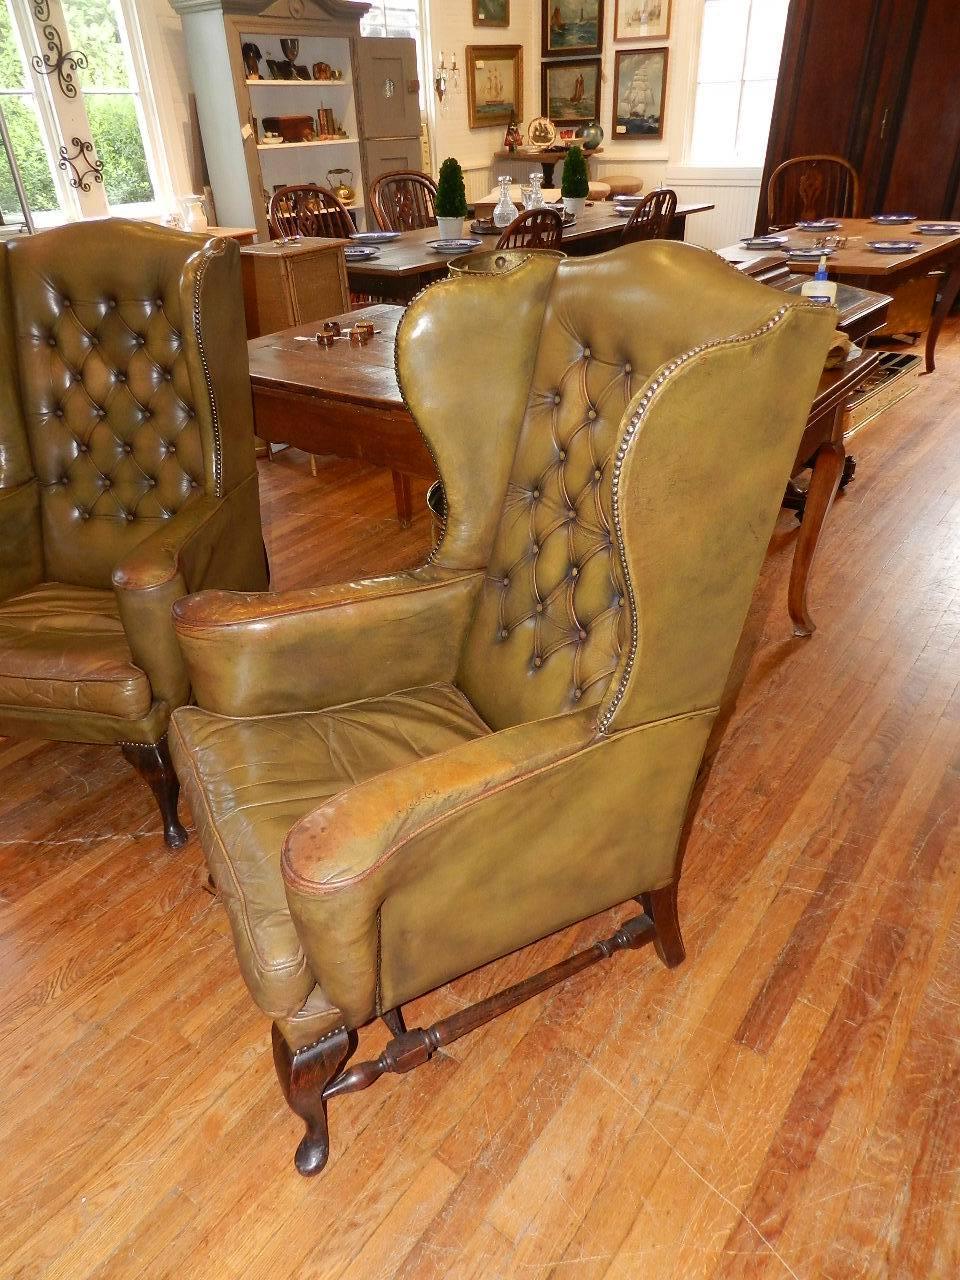 A pair of antique buttoned leather wing chair design club chairs with oak cabriole legs and stretchers. Both chairs have out swept arm rests and shaped seats. The buttoned leather upholstery exhibits the beautiful aged patina that can only be found